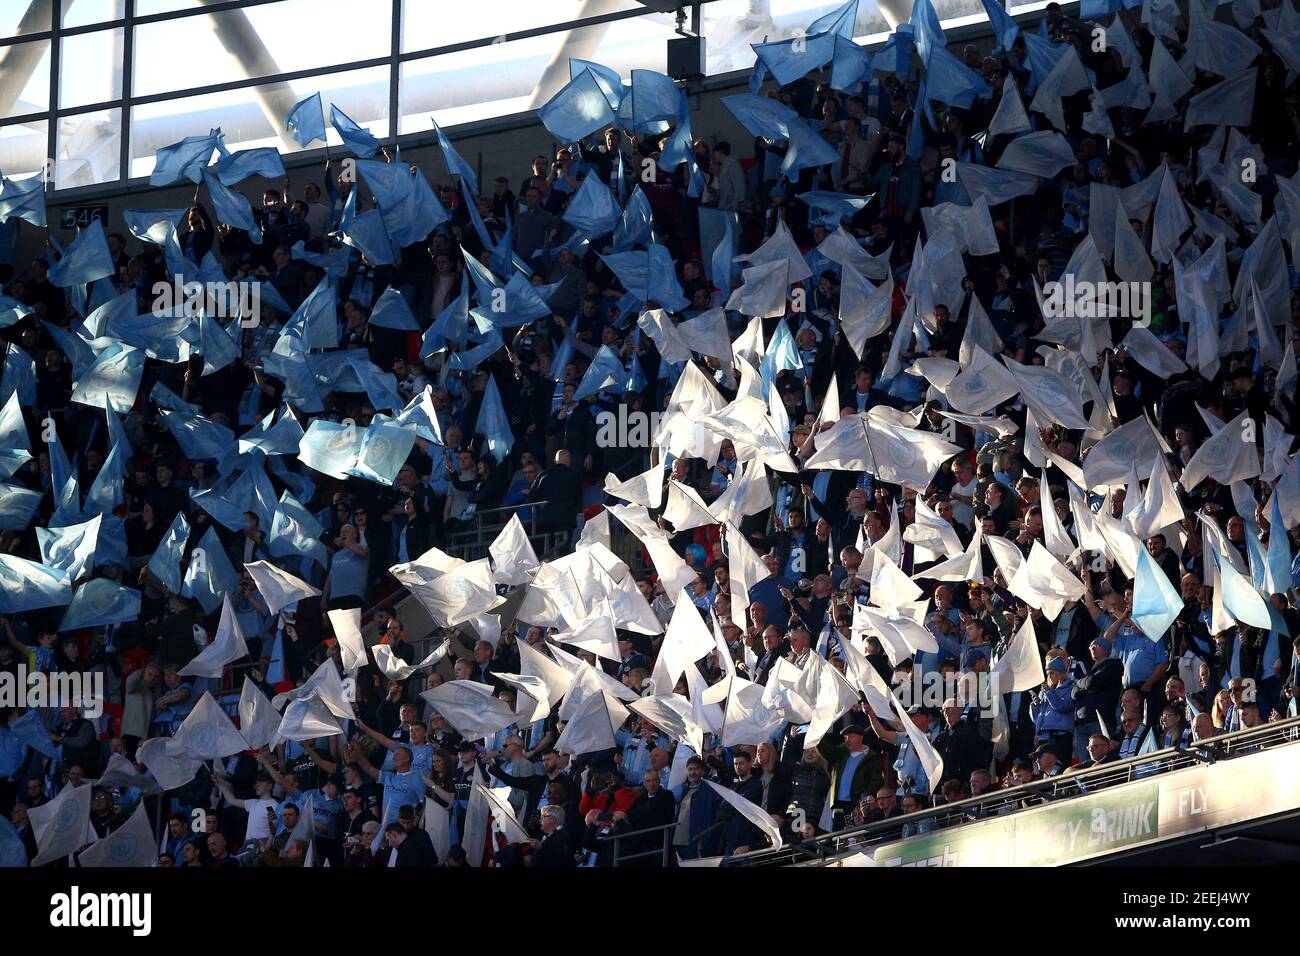 File photo dated 24-02-2019 of fans in the stands waving flags at Wembley Stadium, London. Issue date: Tuesday February 16, 2021. Stock Photo